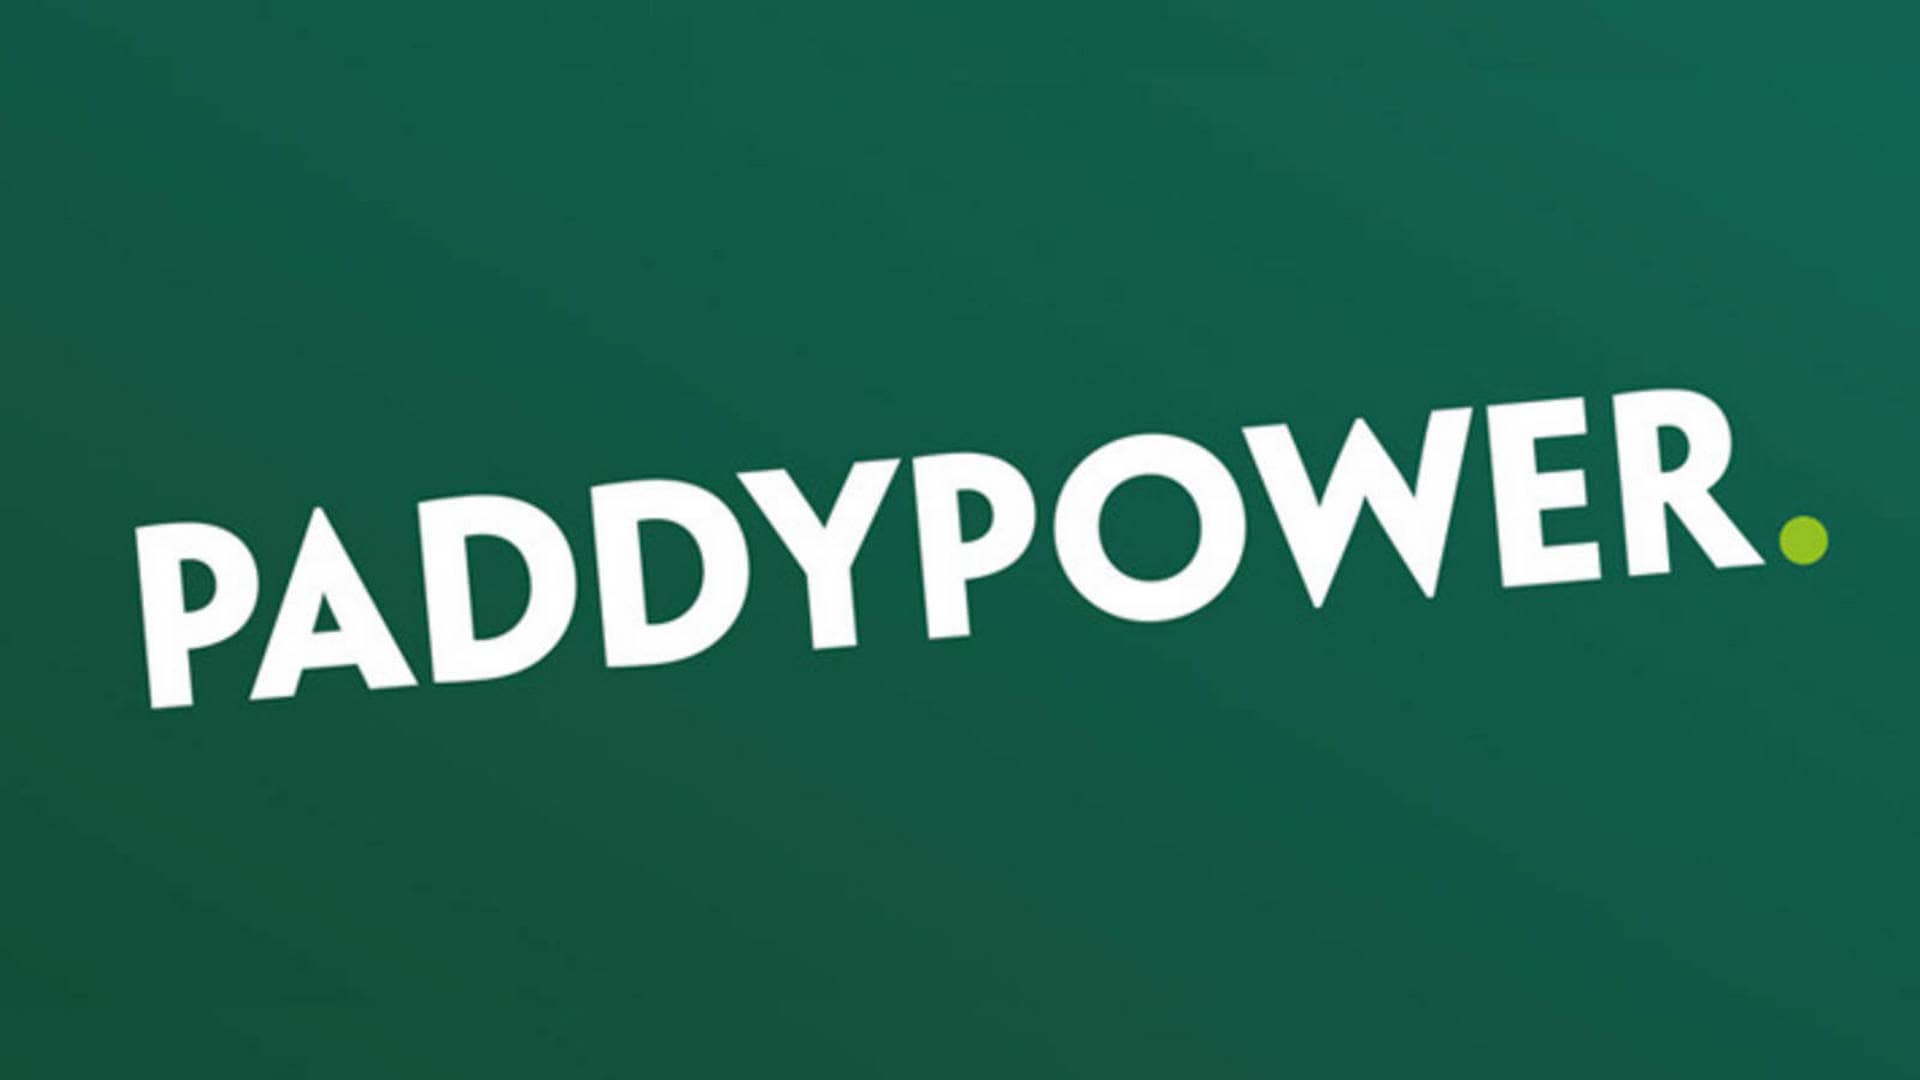 Paddy Power - Best NBA betting sites